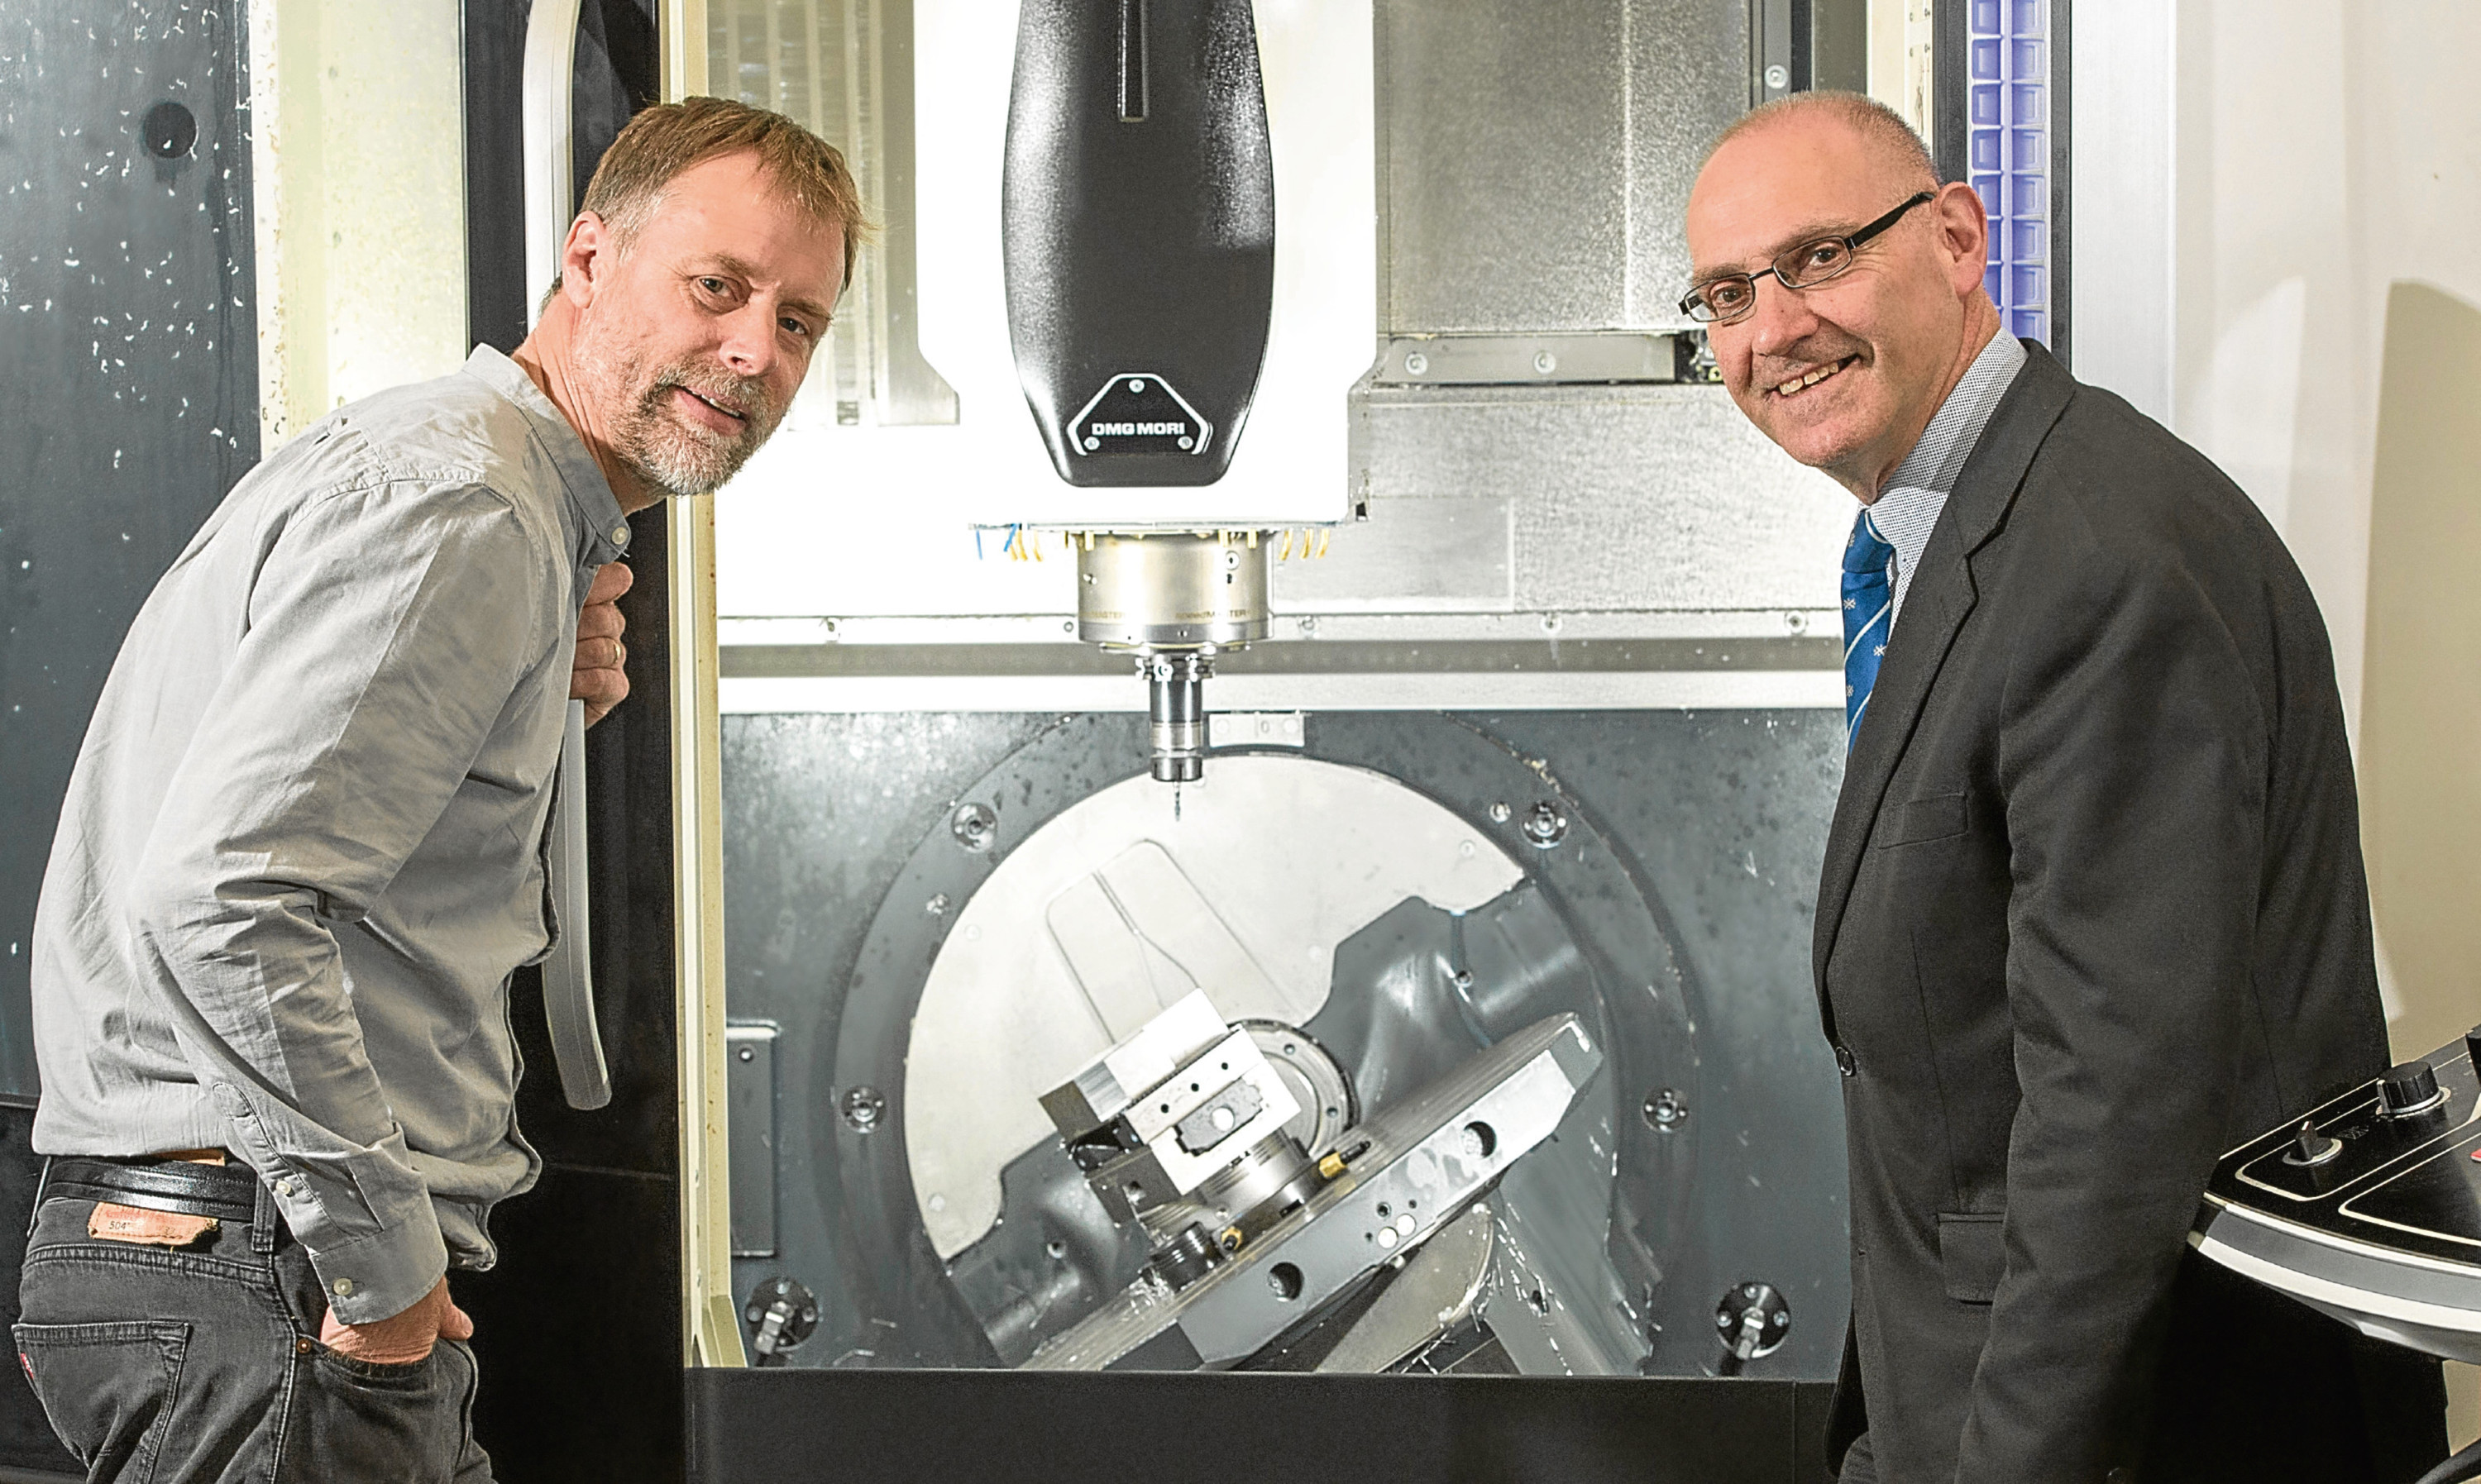 John Mitchell, managing director at Sterling Precision Engineering Services and Charles Davidson from Bank of Scotland with the new milling machine